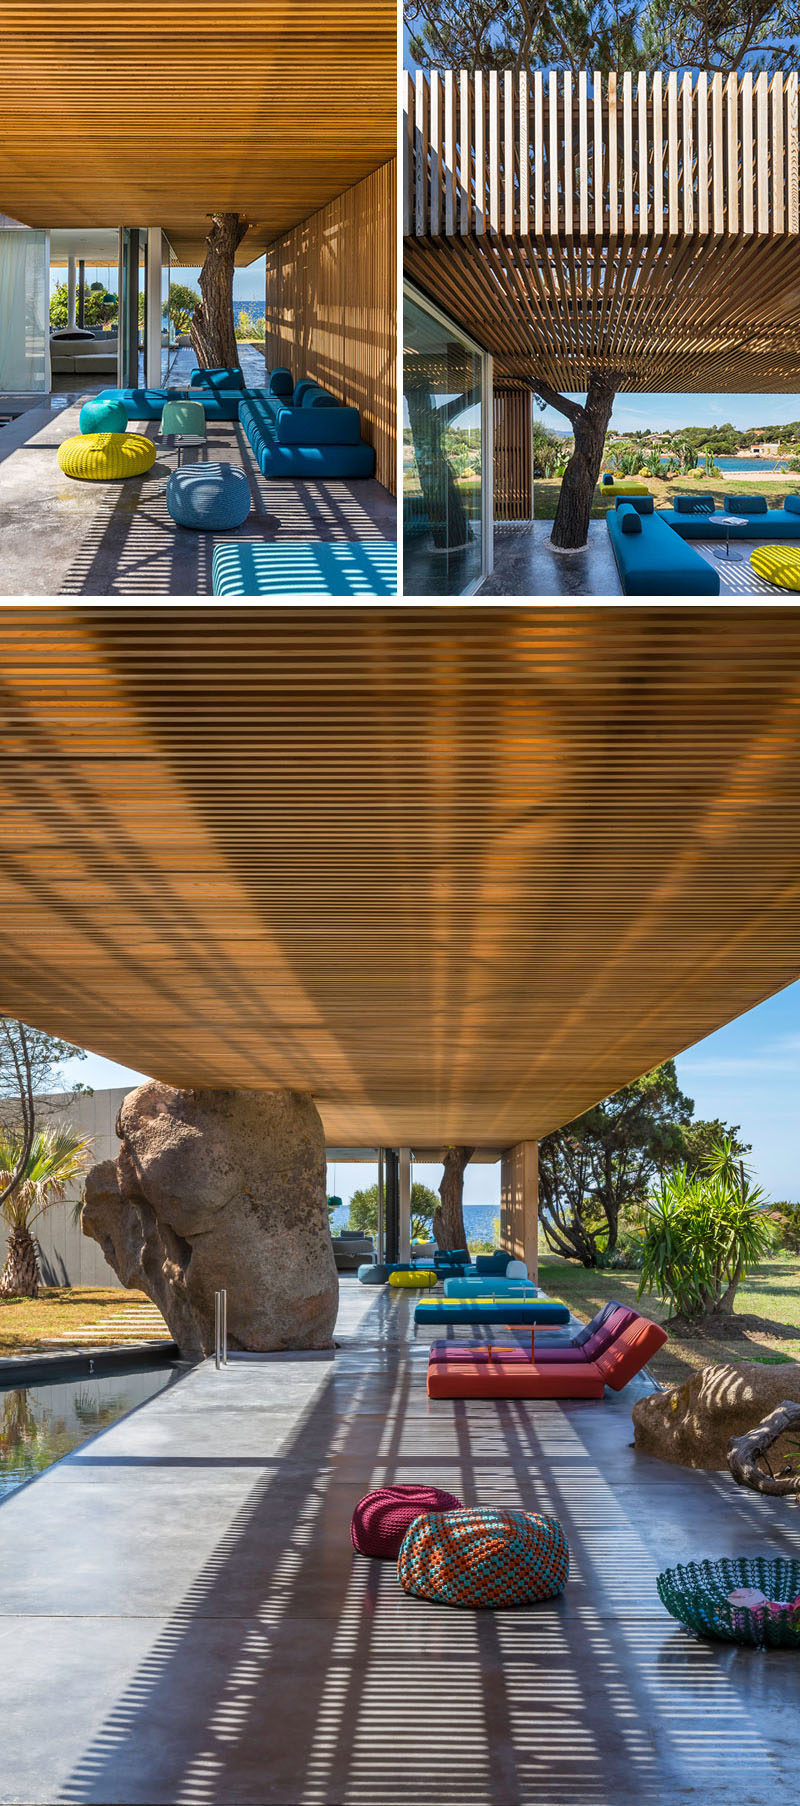 Joining the main living areas of this villa with the bedrooms is a long wood covered pergola. Sections of the pergola have cut-outs that surround trees and allow them to keep growing.